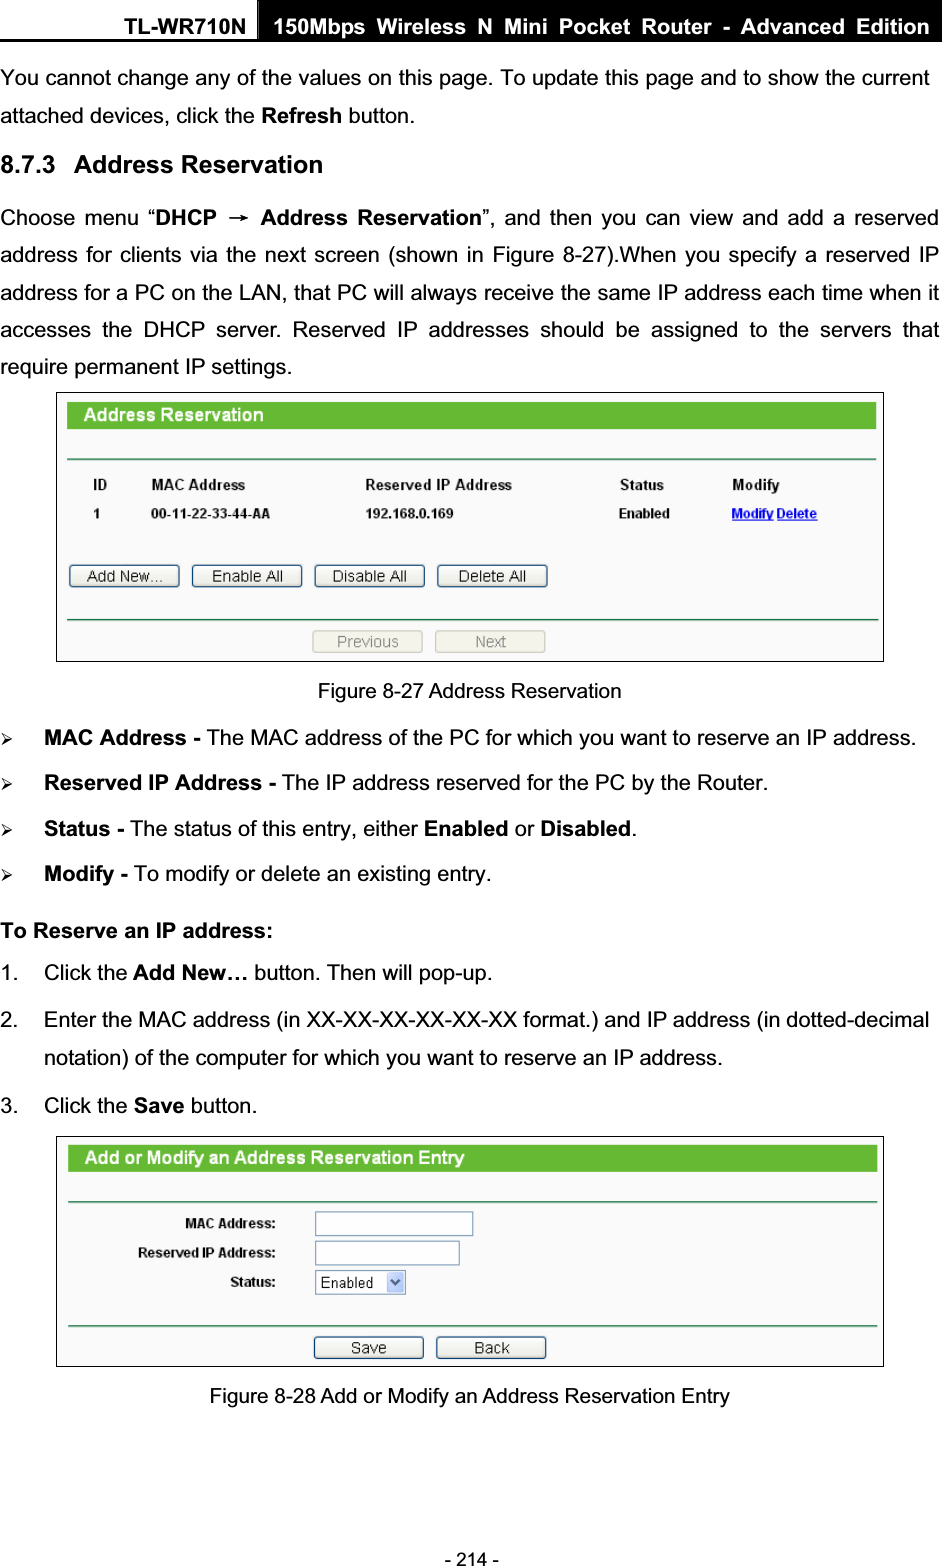 TL-WR710N  150Mbps Wireless N Mini Pocket Router - Advanced Edition- 214 - You cannot change any of the values on this page. To update this page and to show the current attached devices, click the Refresh button. 8.7.3 Address Reservation Choose menu “DHCP ė Address Reservation”, and then you can view and add a reserved address for clients via the next screen (shown in Figure 8-27).When you specify a reserved IP address for a PC on the LAN, that PC will always receive the same IP address each time when it accesses the DHCP server. Reserved IP addresses should be assigned to the servers that require permanent IP settings.   Figure 8-27 Address Reservation ¾MAC Address - The MAC address of the PC for which you want to reserve an IP address. ¾Reserved IP Address - The IP address reserved for the PC by the Router. ¾Status - The status of this entry, either Enabled or Disabled.¾Modify - To modify or delete an existing entry. To Reserve an IP address:1. Click the Add New… button. Then will pop-up. 2.  Enter the MAC address (in XX-XX-XX-XX-XX-XX format.) and IP address (in dotted-decimal notation) of the computer for which you want to reserve an IP address.   3. Click the Save button.   Figure 8-28 Add or Modify an Address Reservation Entry 